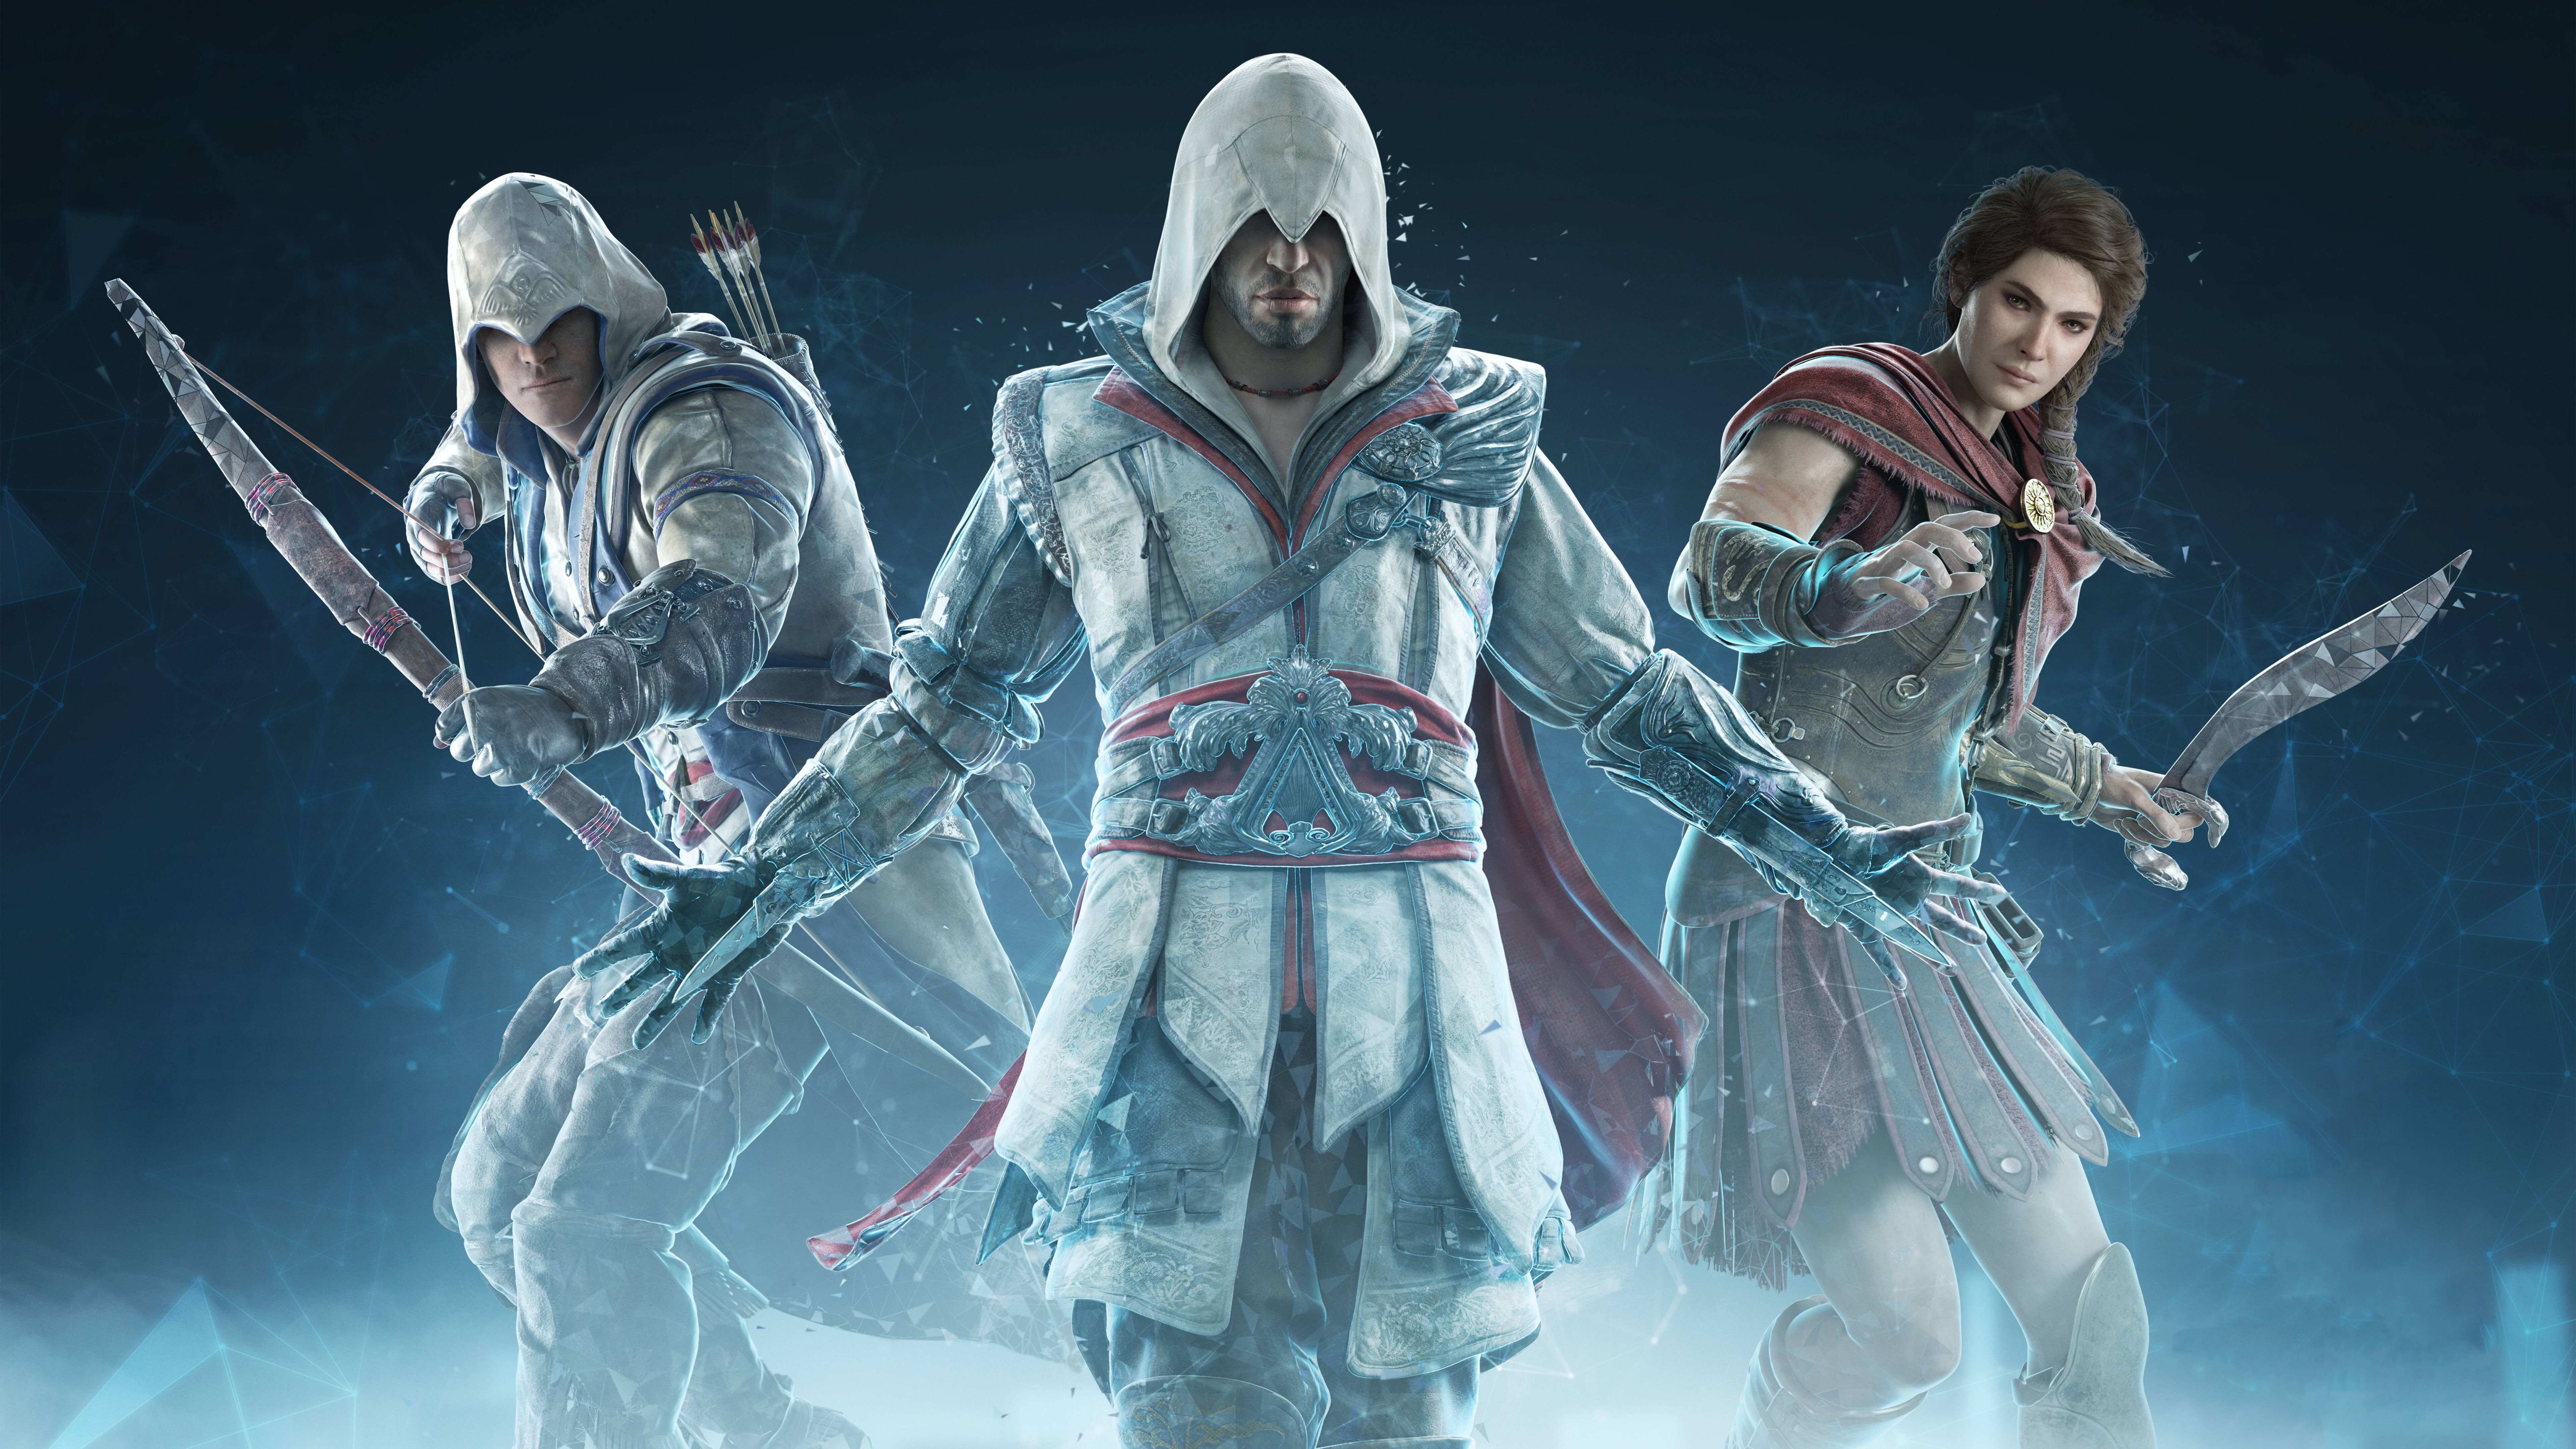 Wallpaper  Assassins Creed 3 Guide  IGN